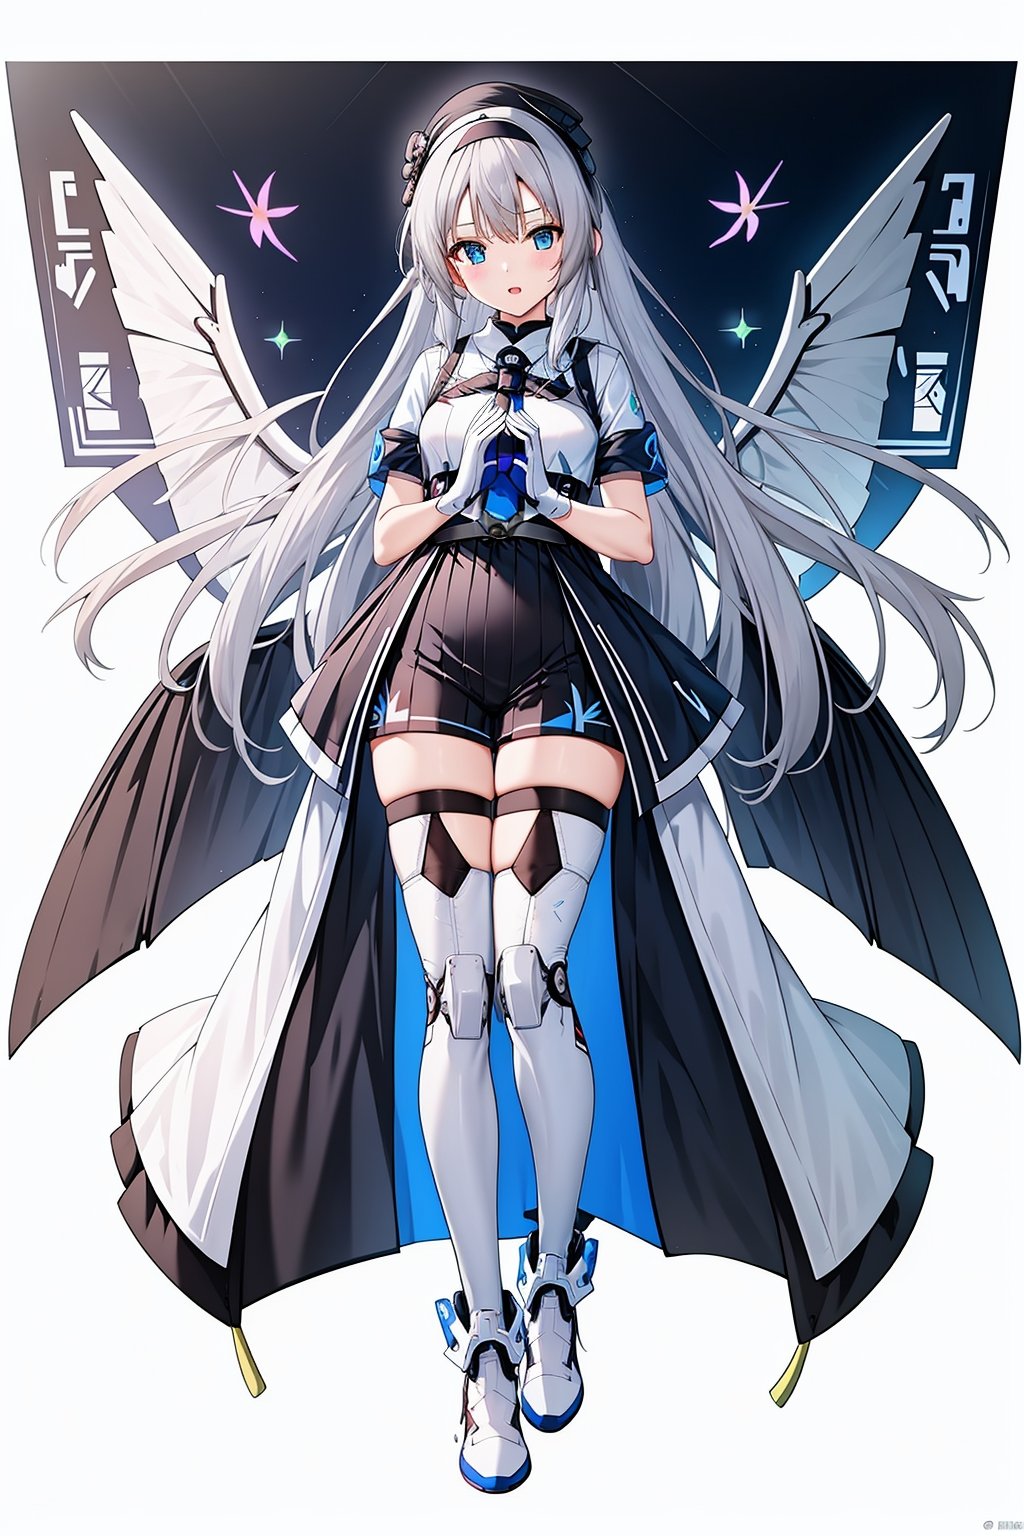 1 girl, solo, gradual change color Mecha pants, wings, long hair, white shoes, hair accessories, looking at the audience, white hair, hair accessories, bangs, blue eyes, staff, clean background, mechanical wings, gloves, simple background, cute, graphics card propaganda figure, console, (gradual change color Cheongsam), festive, (Matisse :1.5), ancient Chinese architecture,,<lora:天启姬:0.7>,